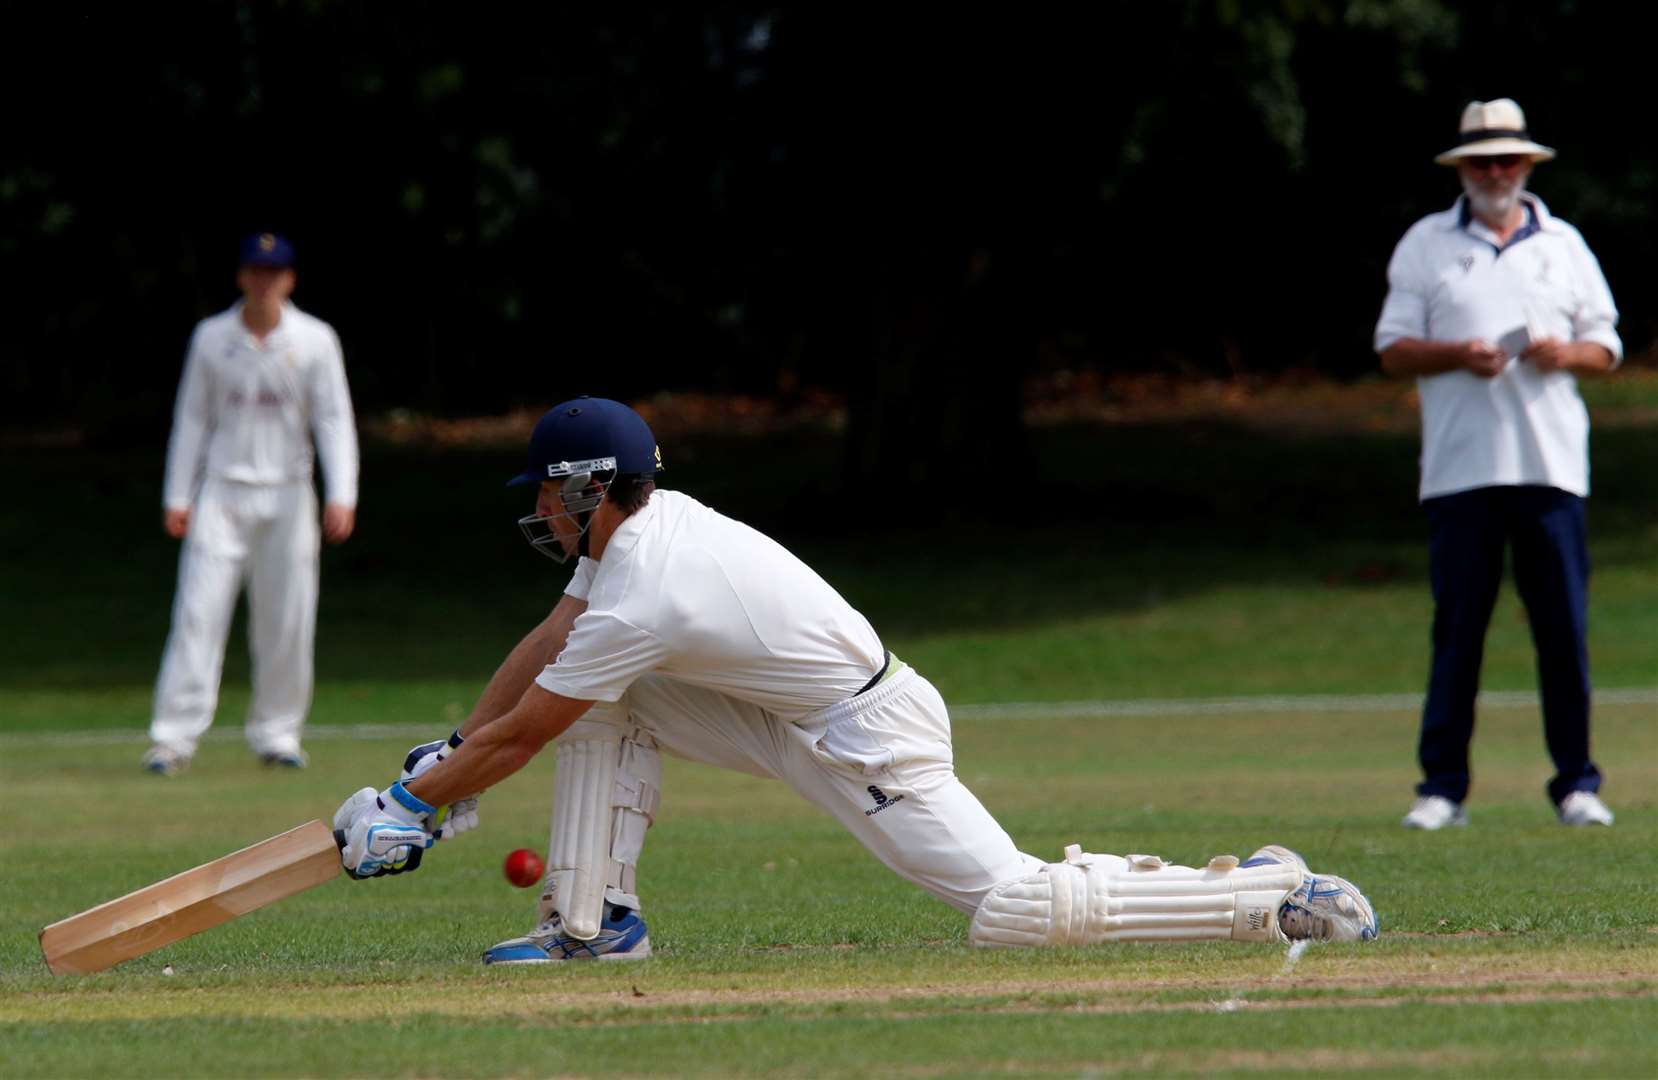 The Mote batsman Tom Harvey is available to start the season. Picture: Andy Jones